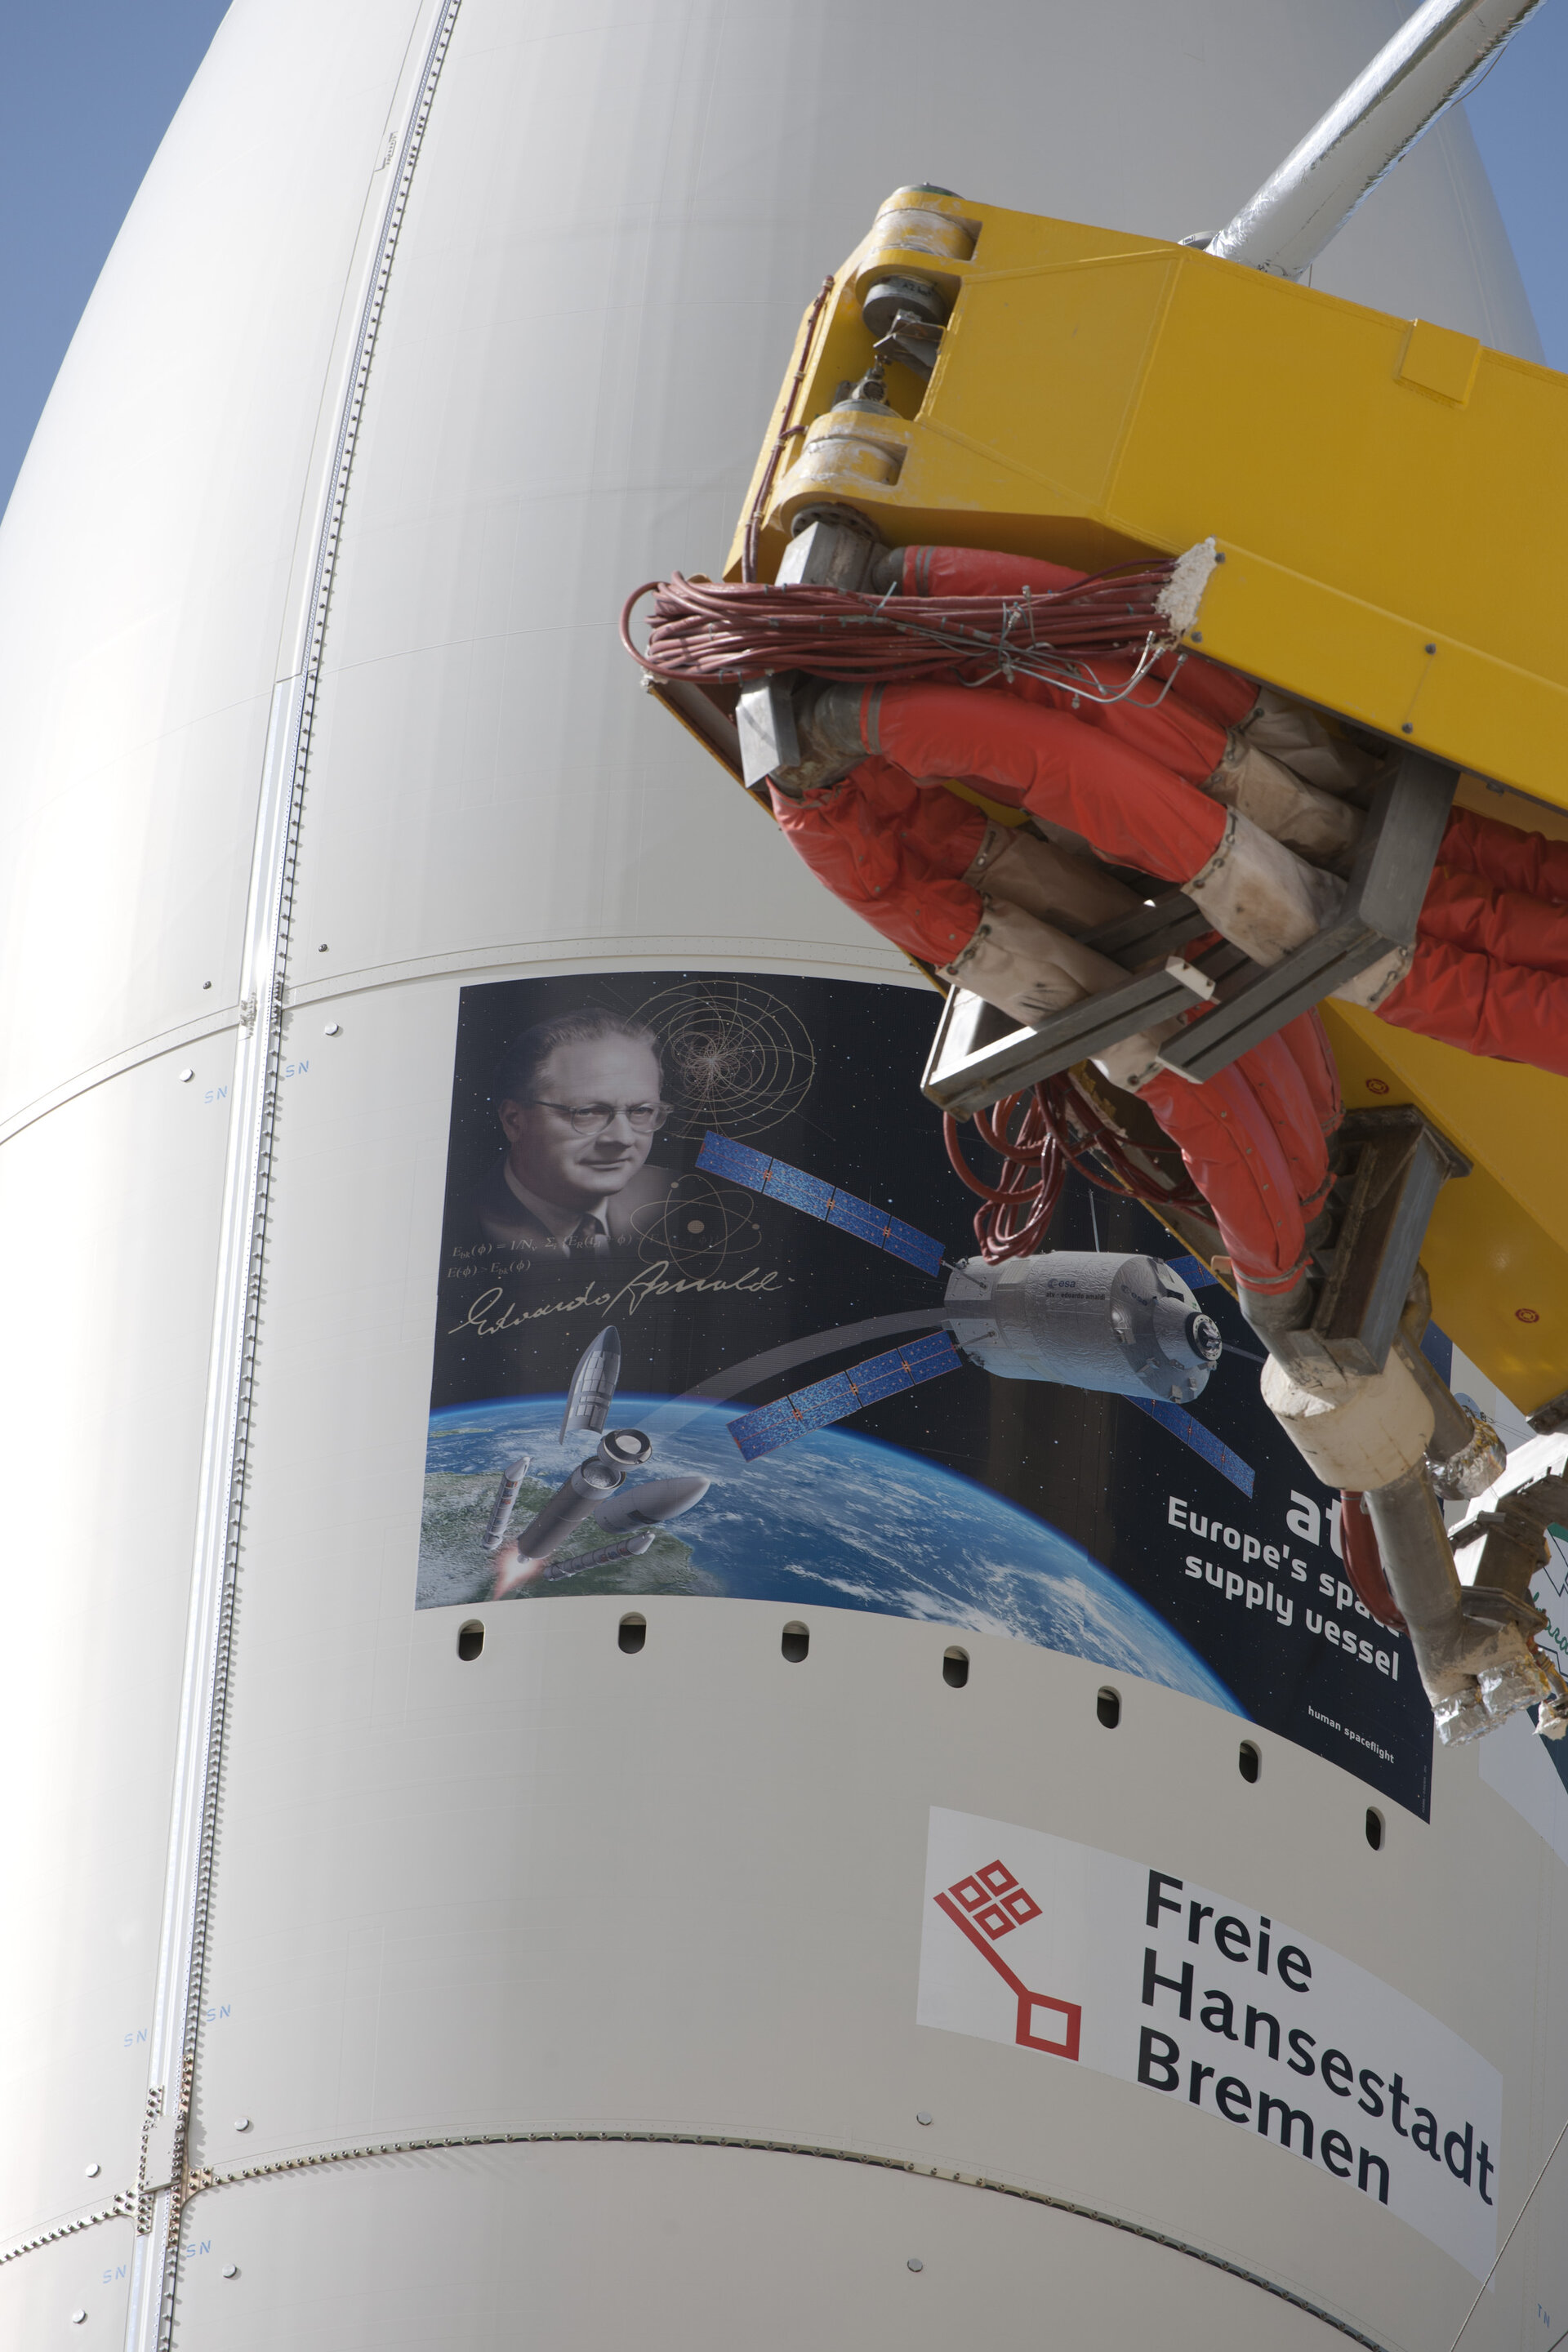 Close up view of the payload fairing